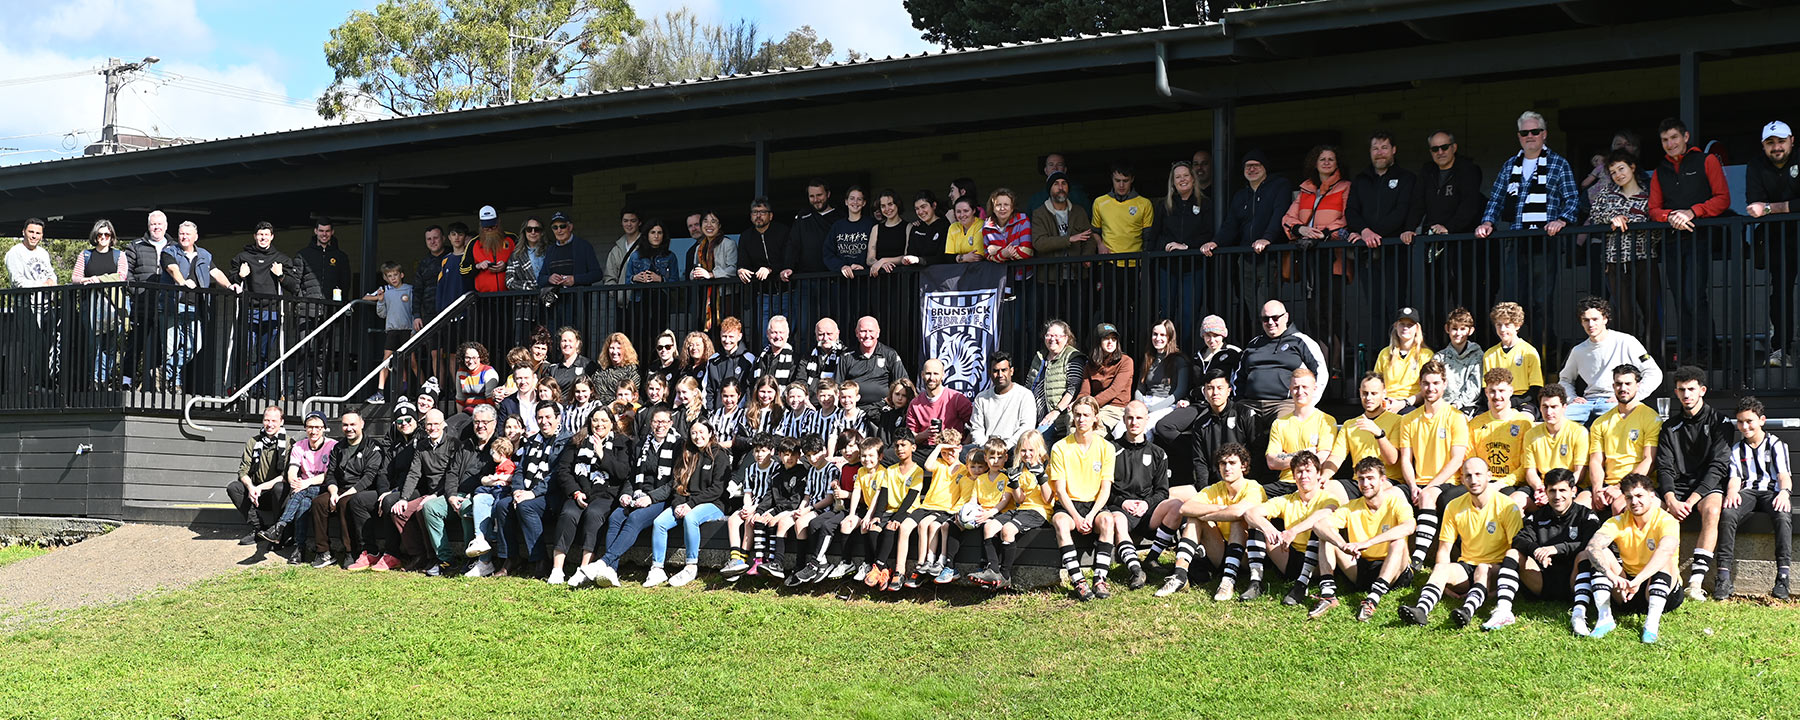 Group photo at Sumner Park clubrooms. Gem Photography.